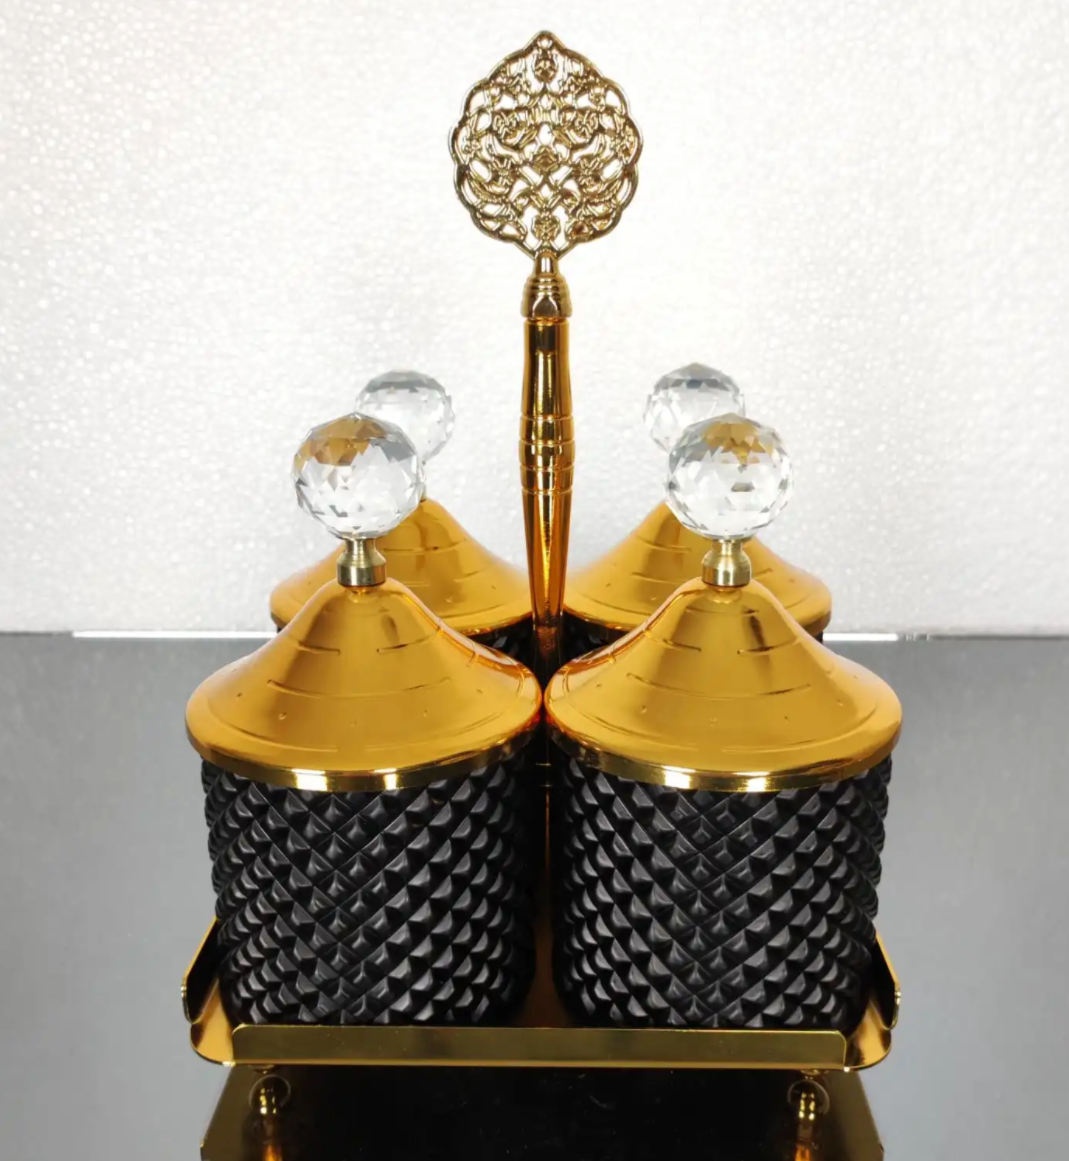 Gold  and Black Spices Hammered Canister with Stand 4 pcs Set